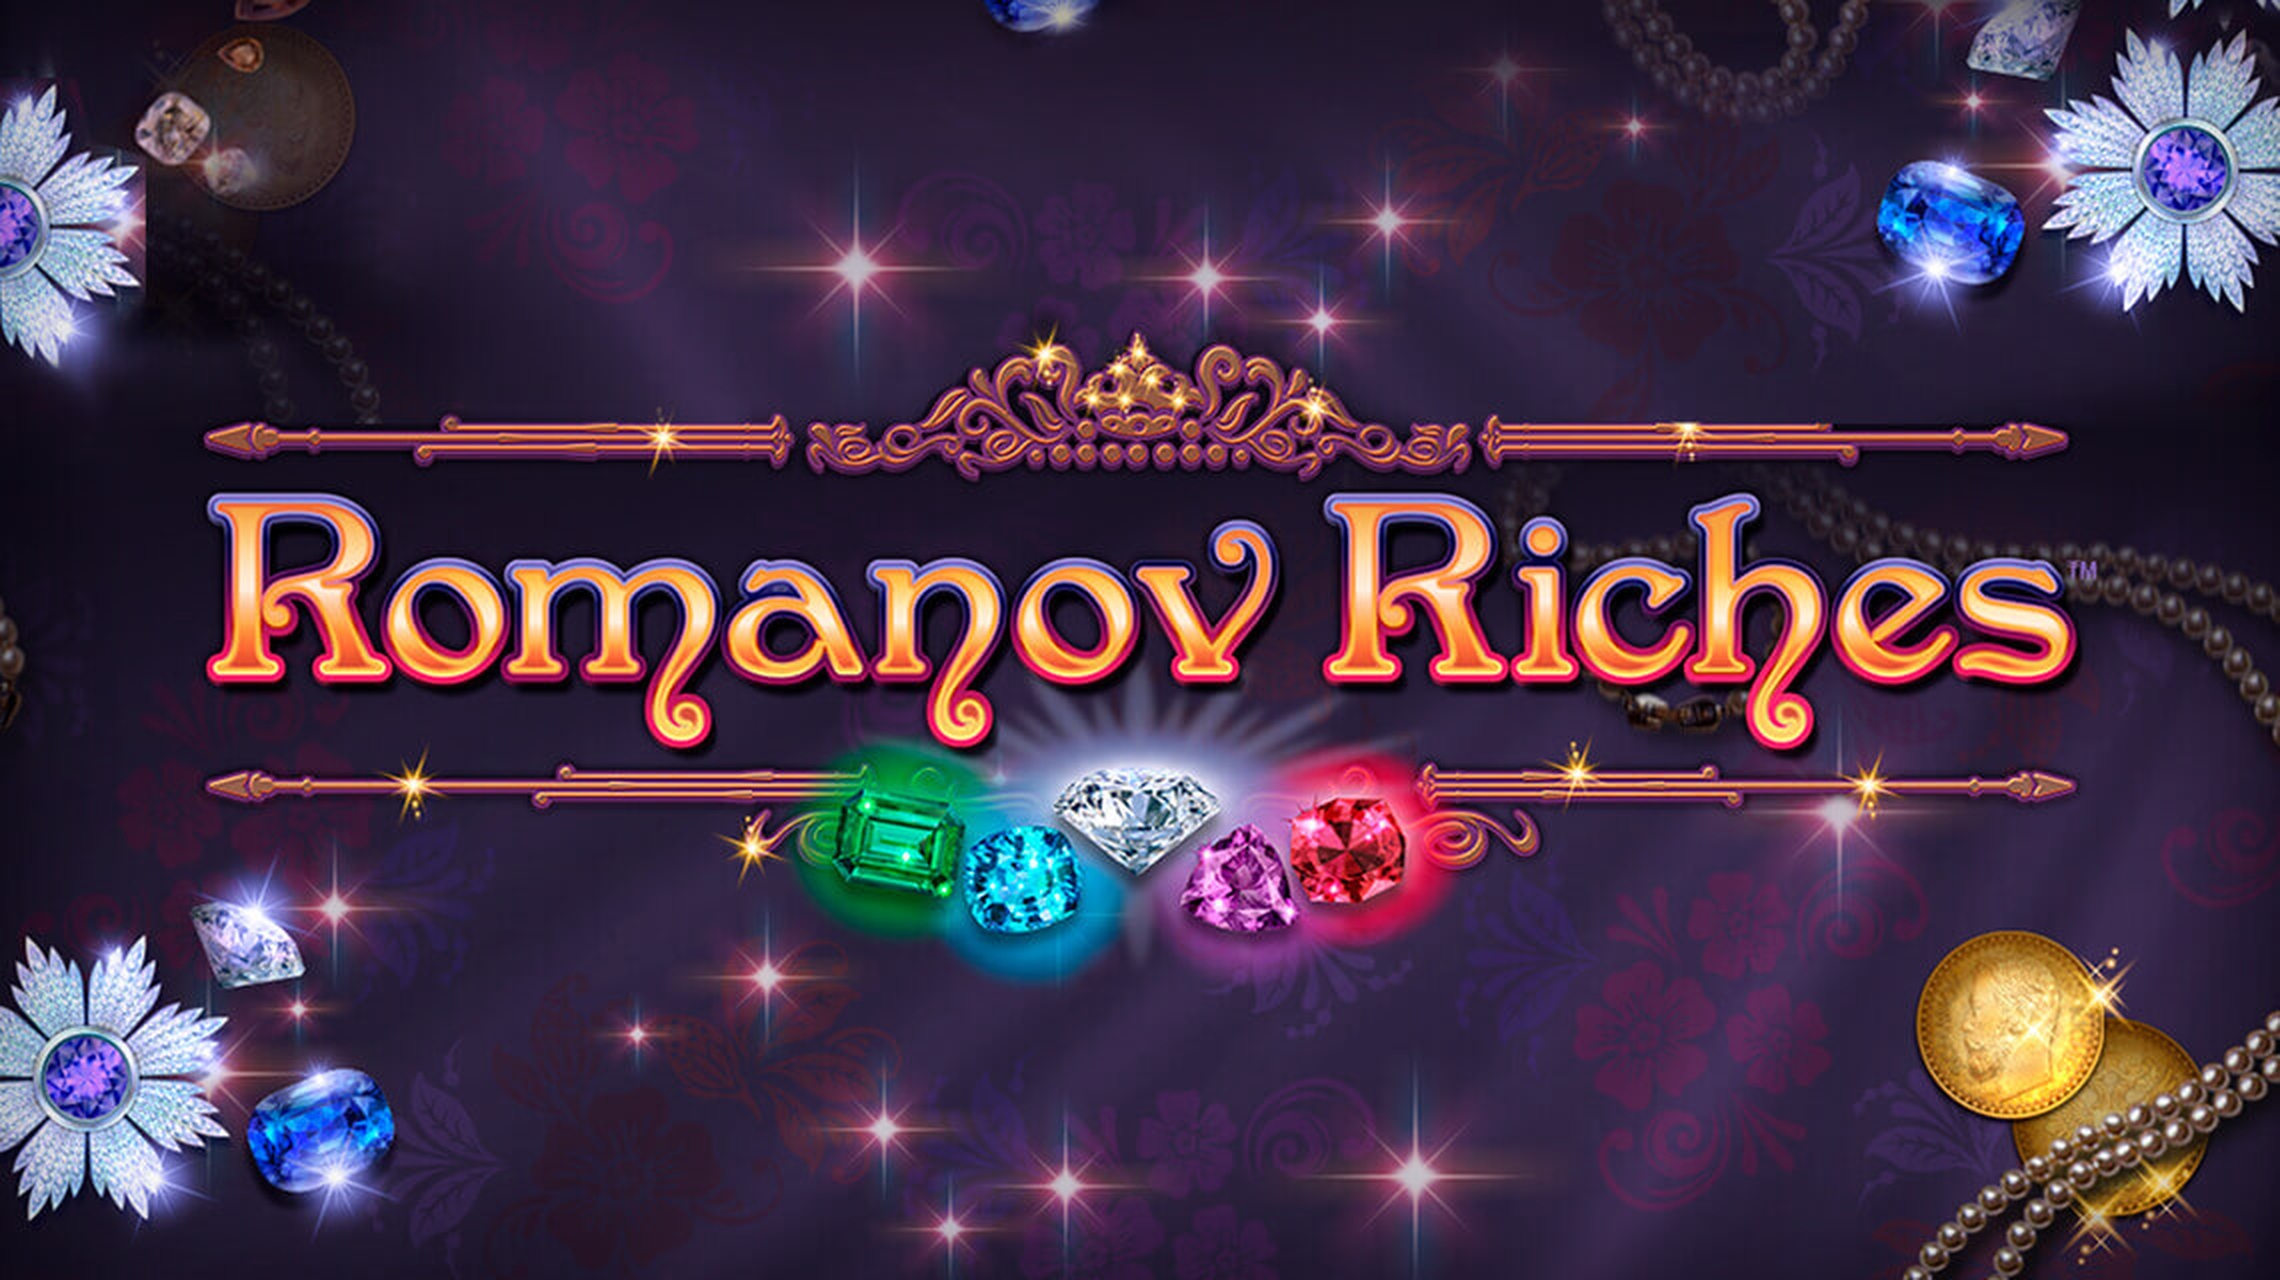 The Romanov Riches Online Slot Demo Game by Fortune Factory Studios